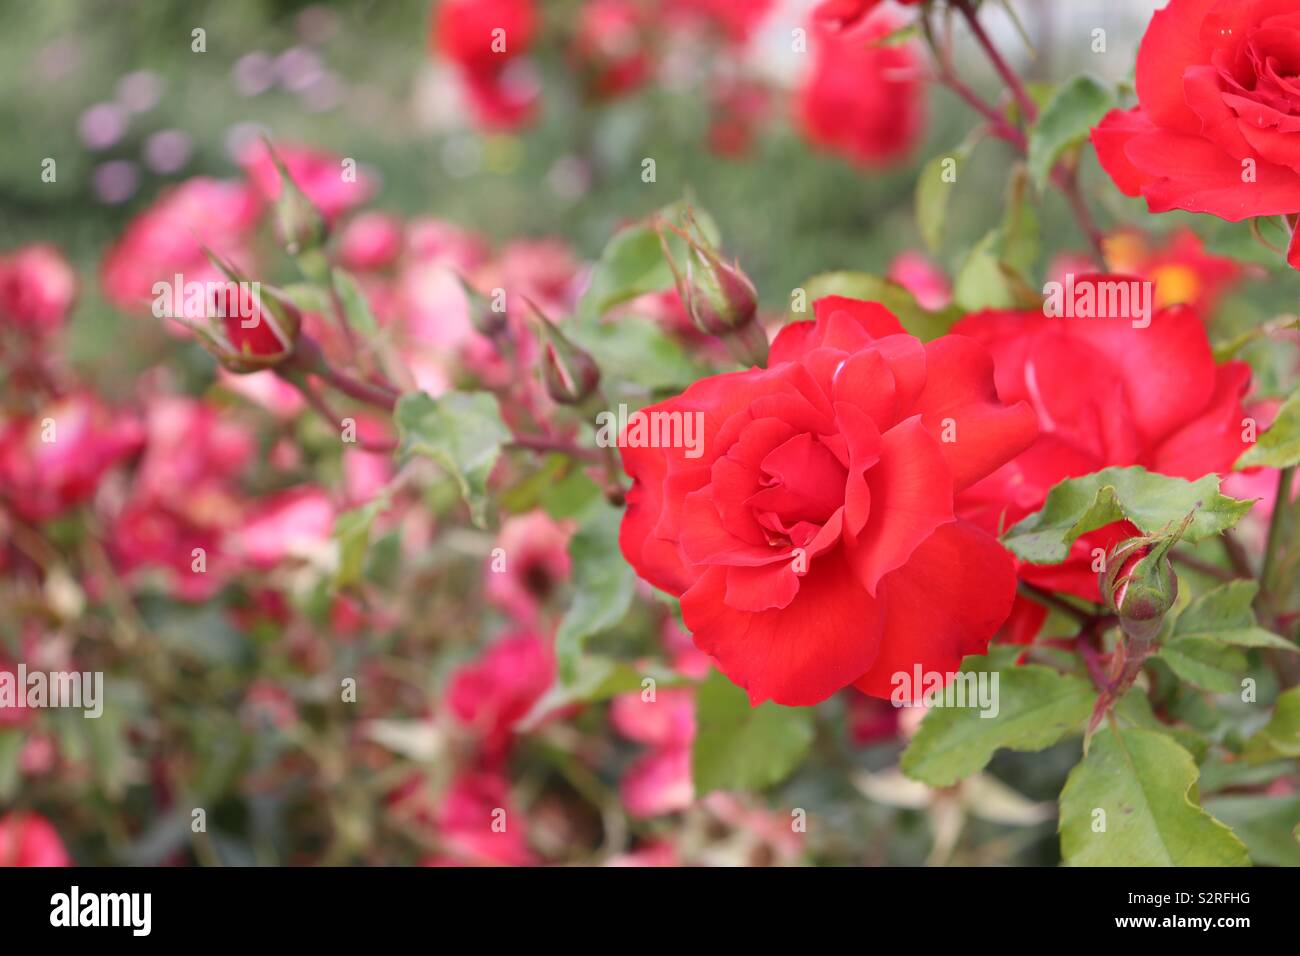 Closeup image of red rose in full bloom Stock Photo